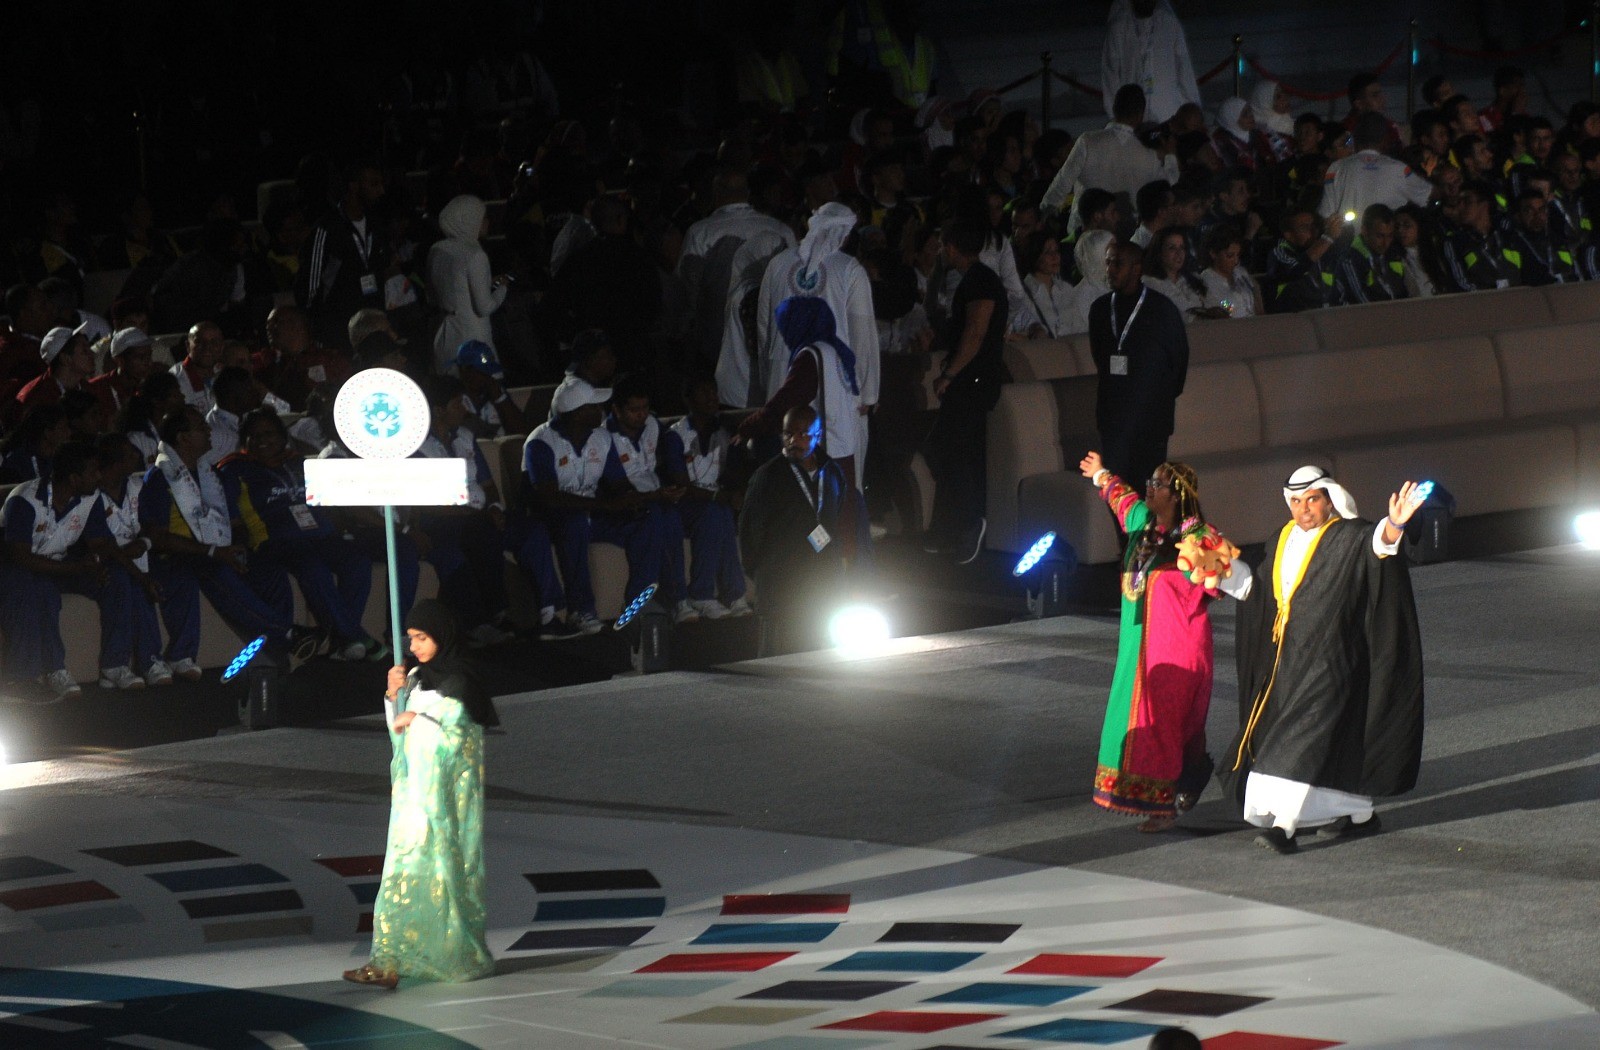 The opening ceremony of the Special Olympics MENA Games Abu Dhabi 2018